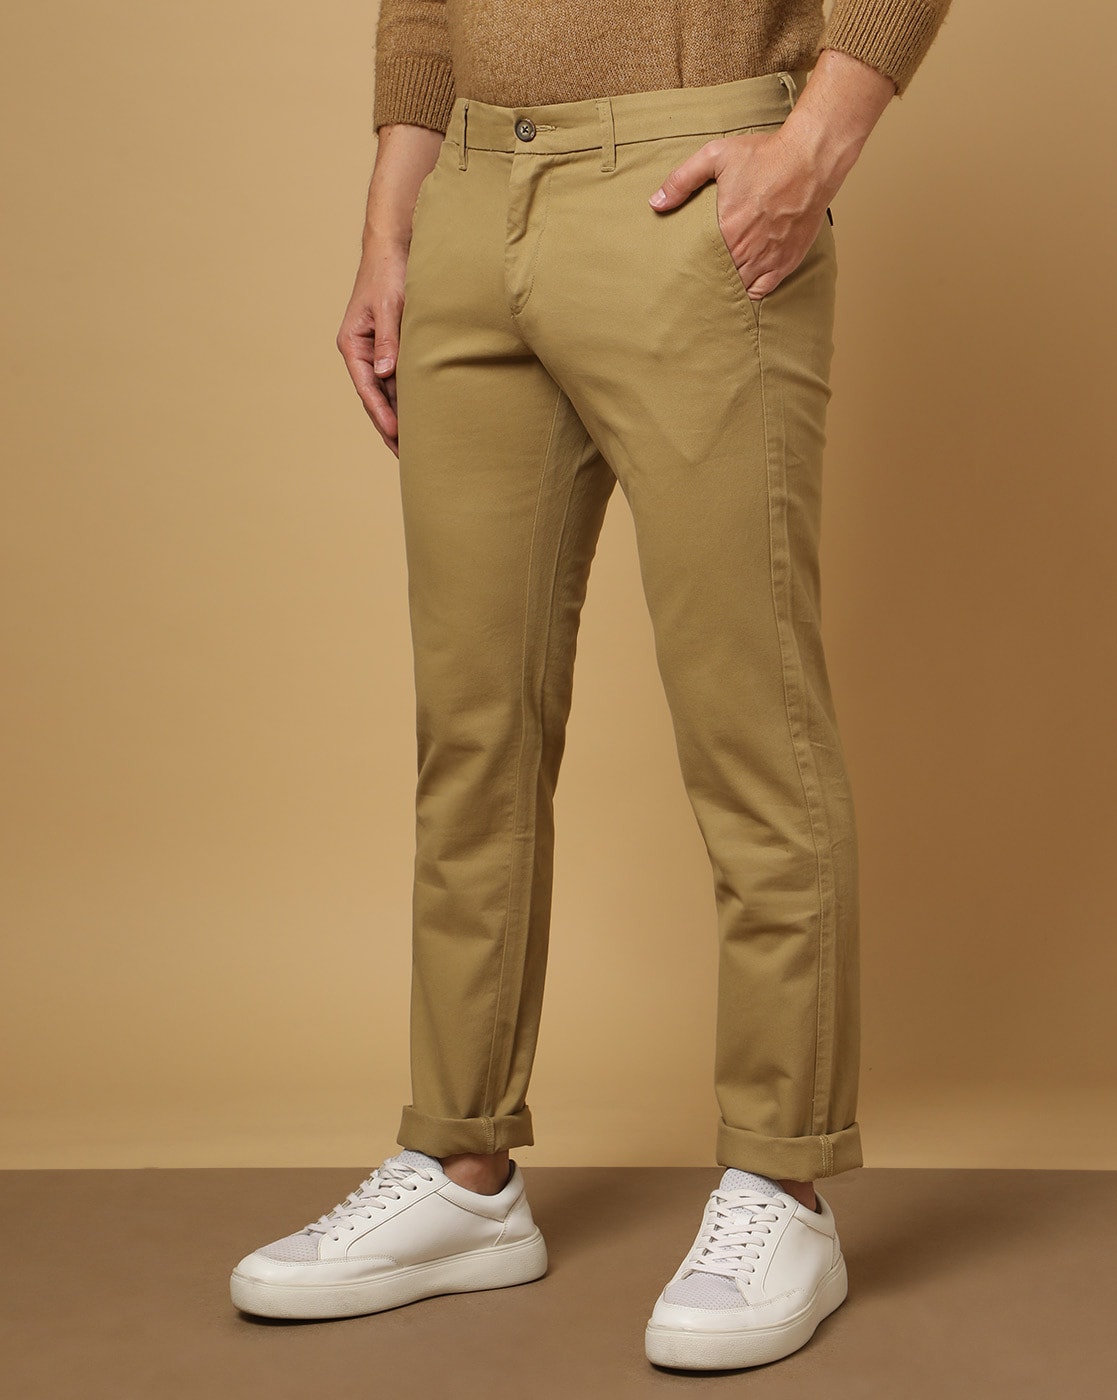 Us polo assn black trousers  Buy Us polo assn black trousers online in  India